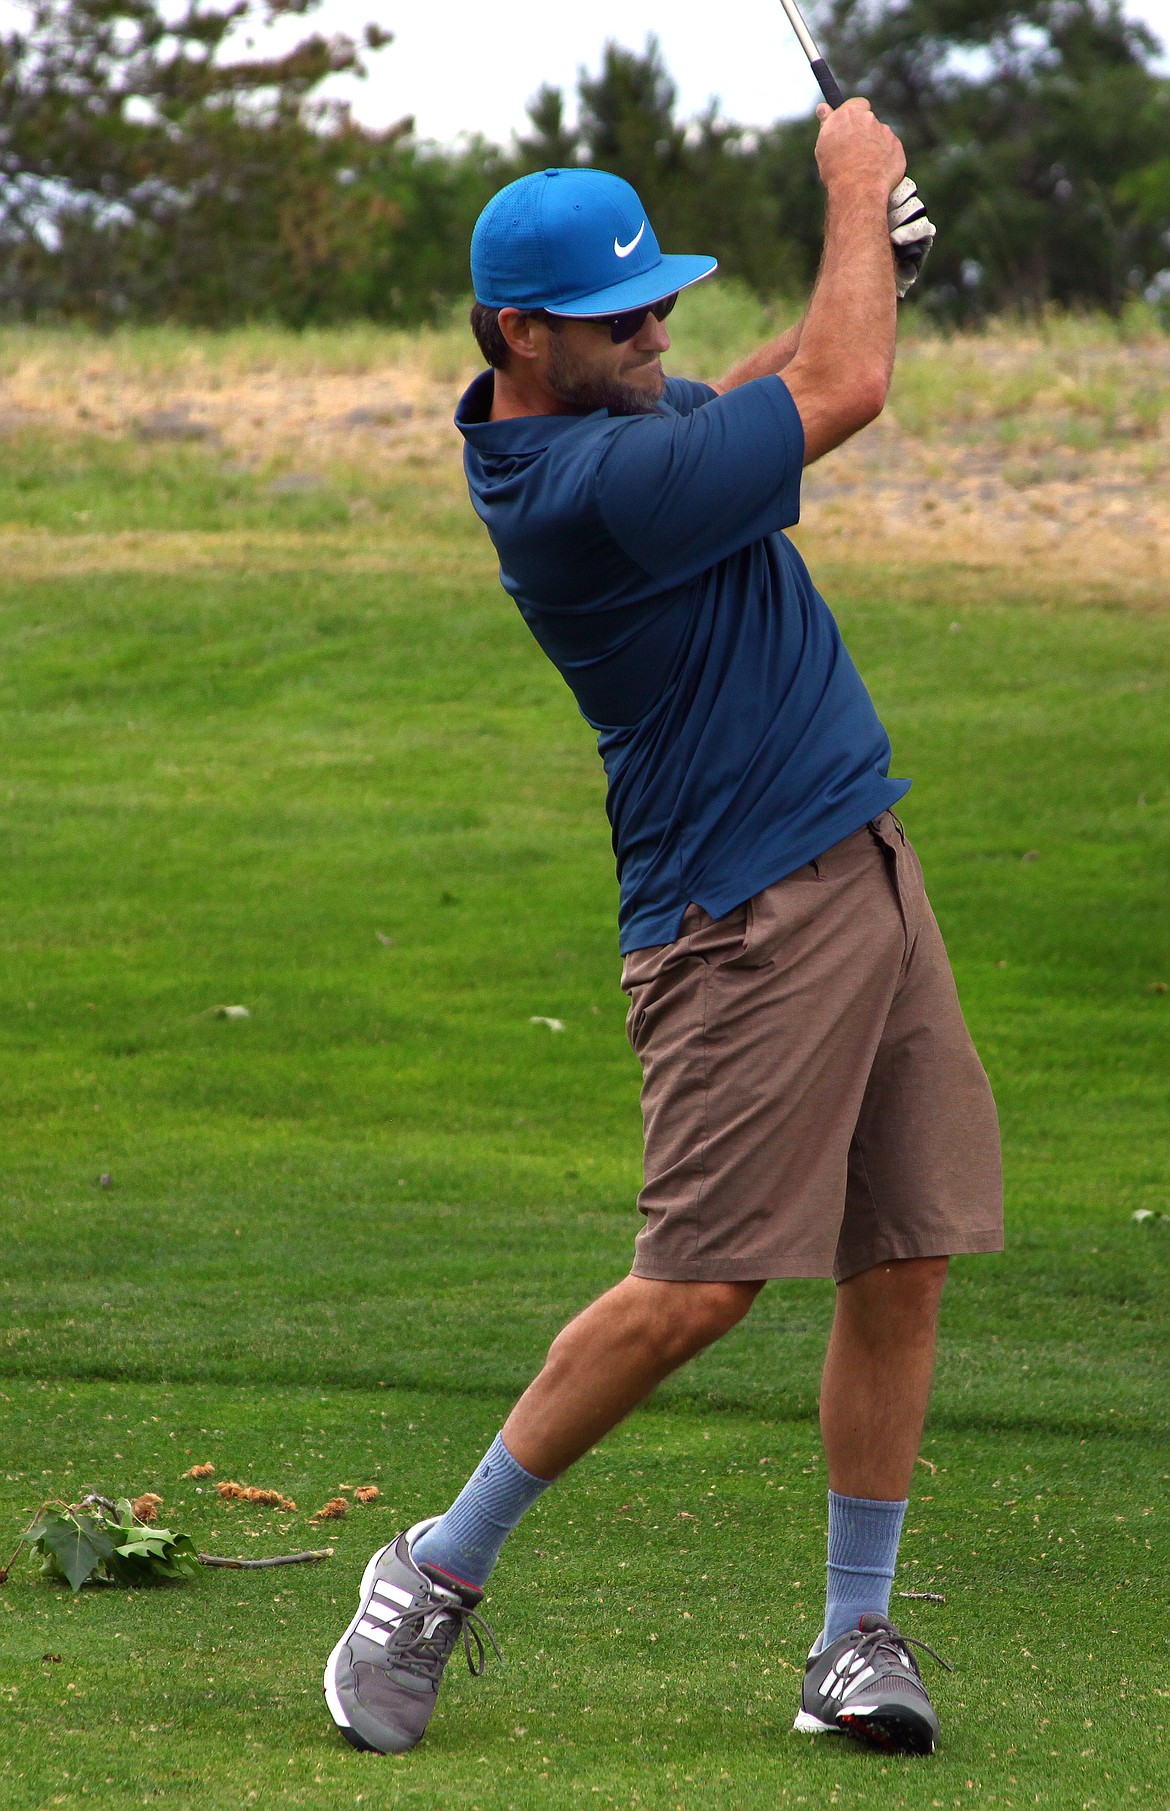 Rodney Harwood/Columbia Basin HeraldColumbia Basin Herald publisher Eric LaFontaine follows his approach shot into the 12th green during Thursday's Newspapers in Education Golf Tournament at the Moses Lake Golf Club.